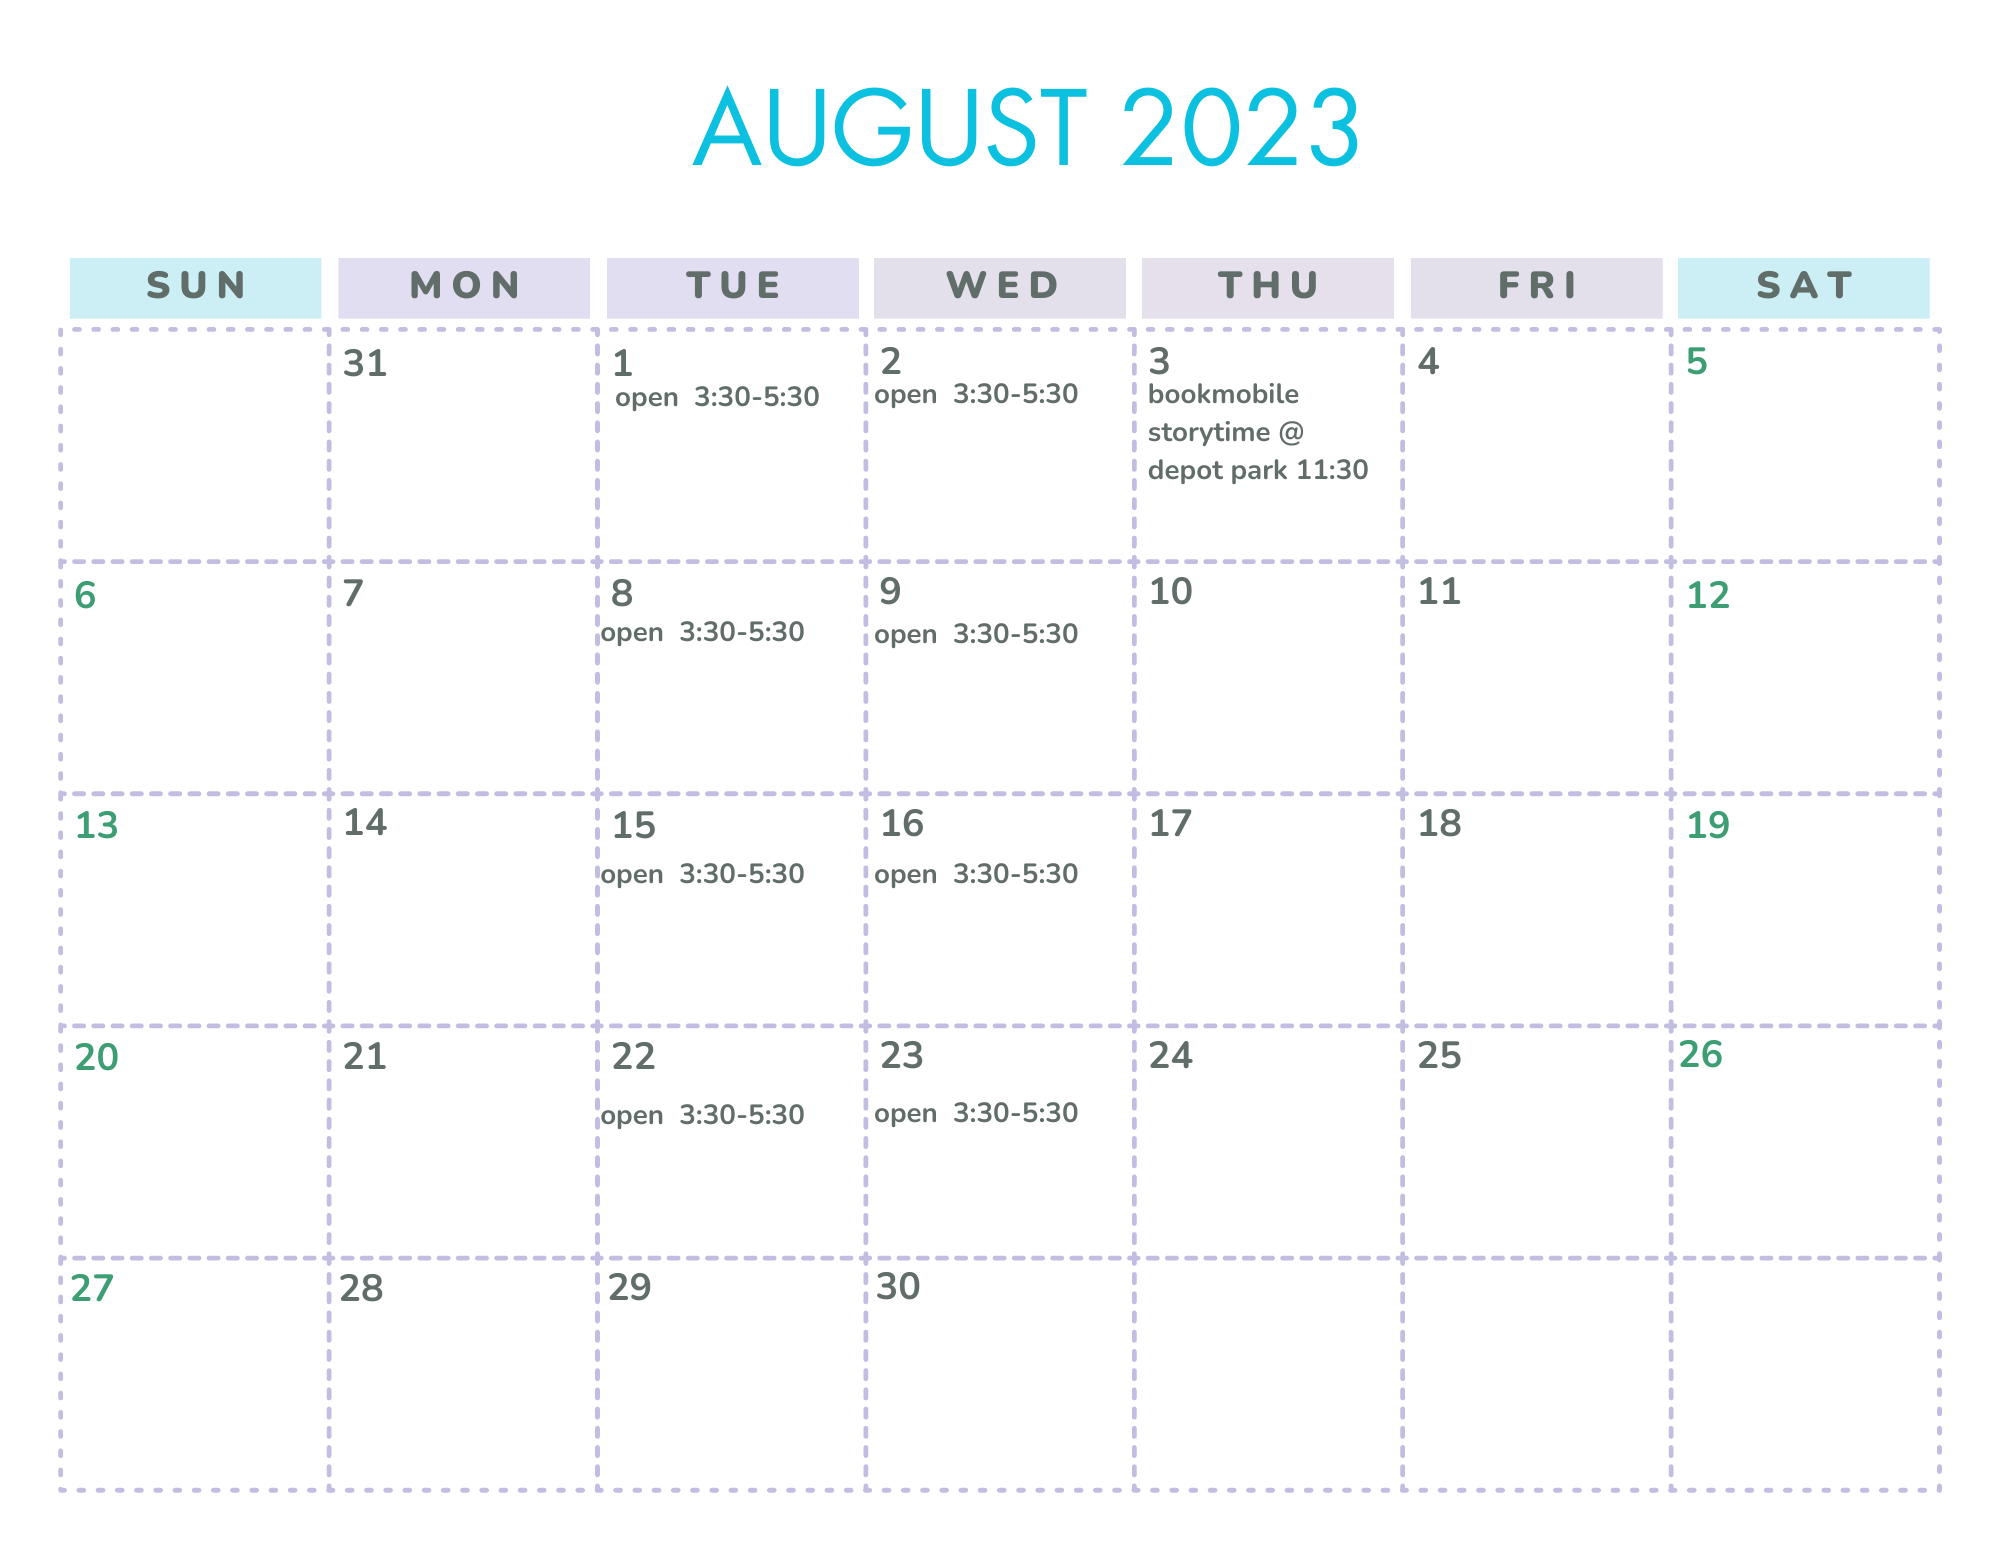 august 2023 calendar showing open library dates